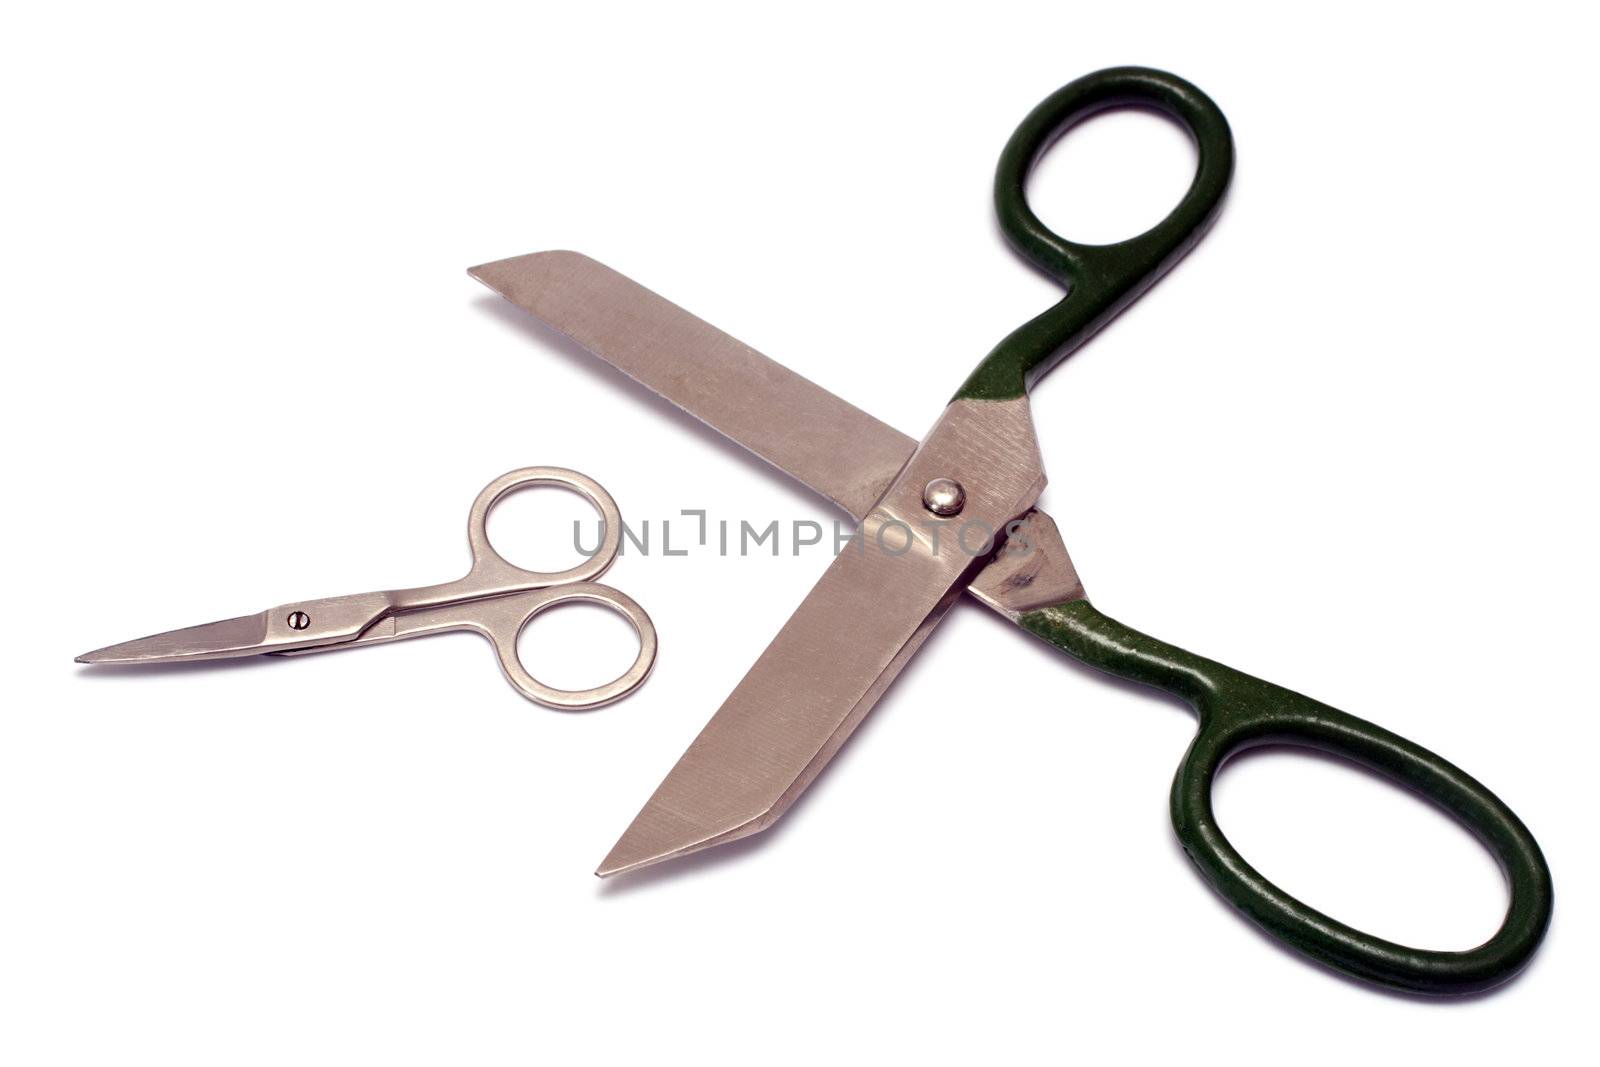 big and small shears close-up by Mikko